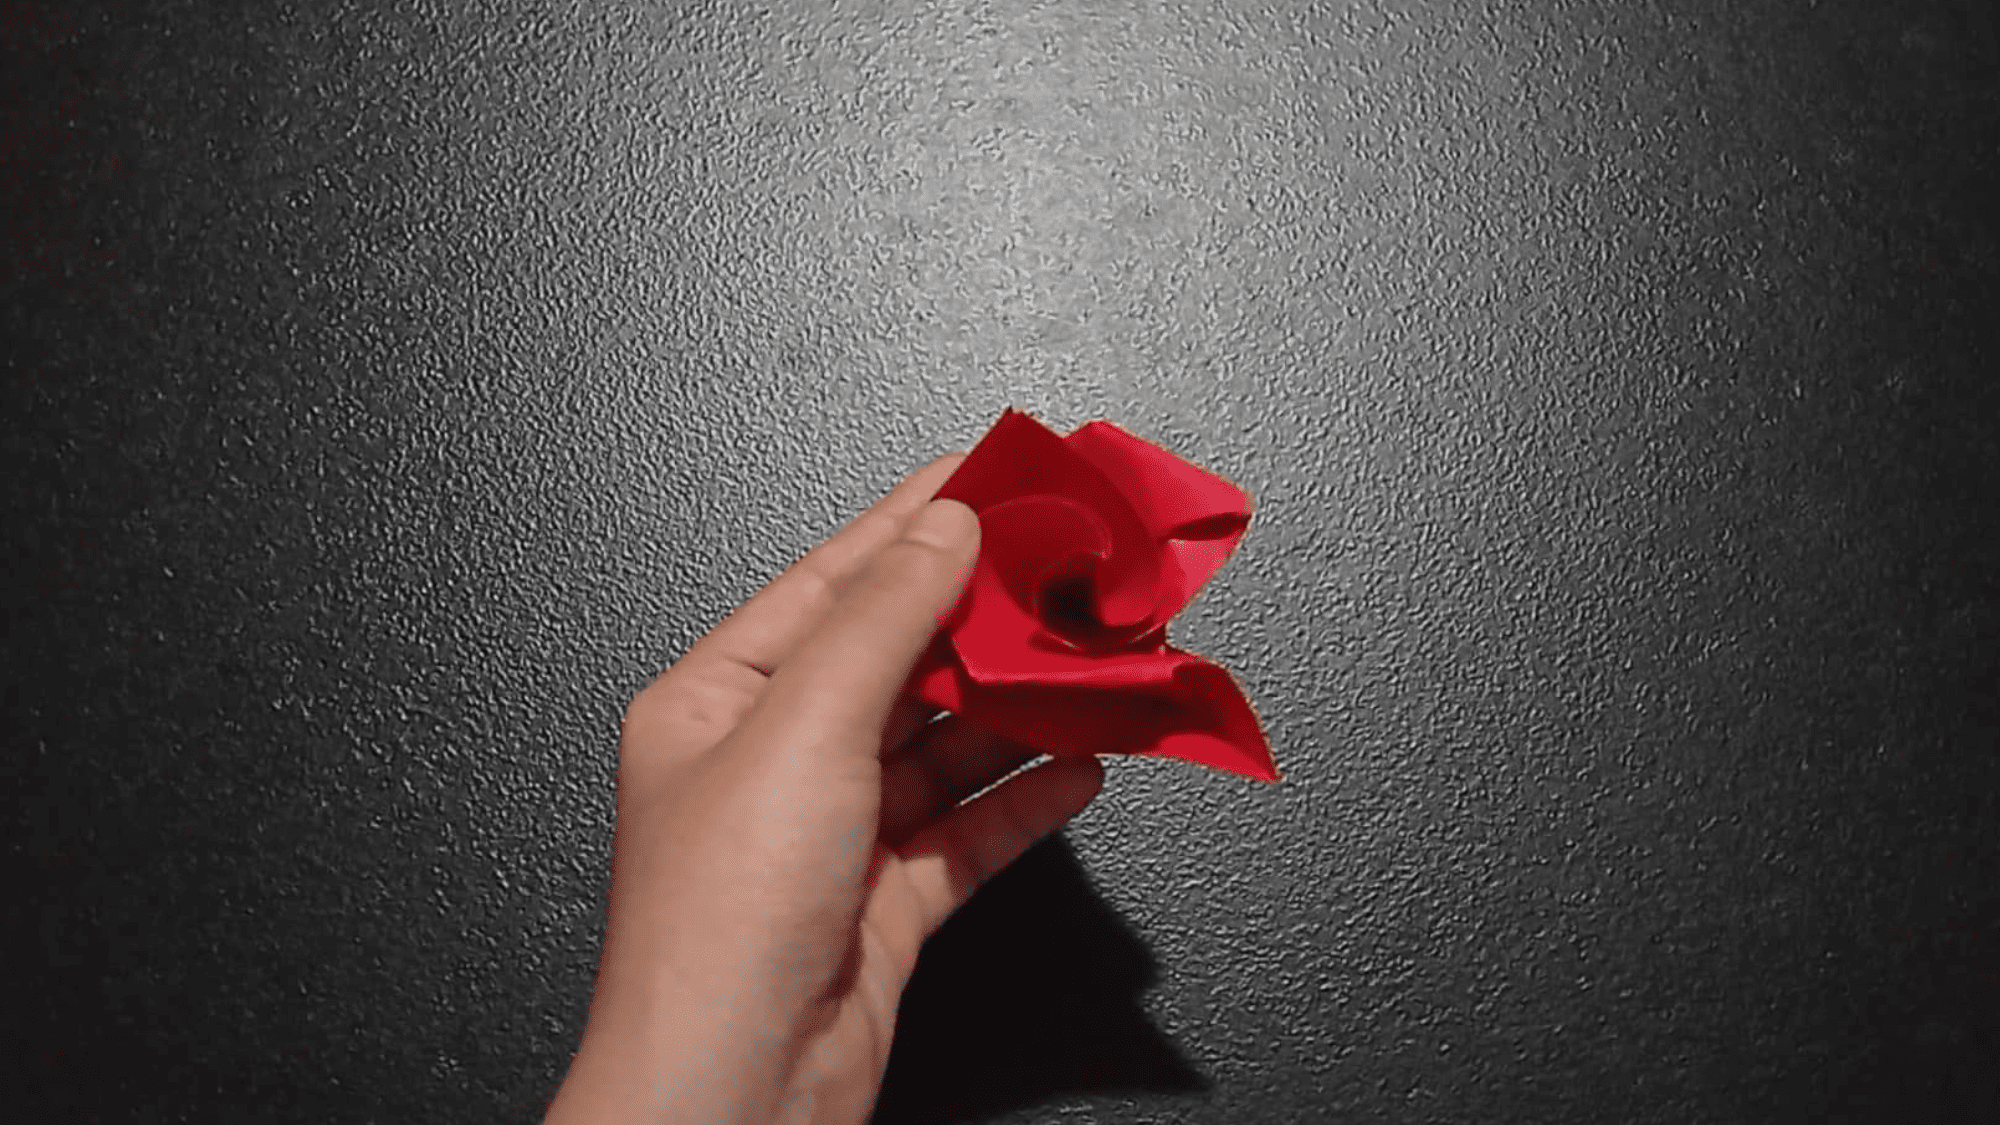 origami rose instructions step 16.3